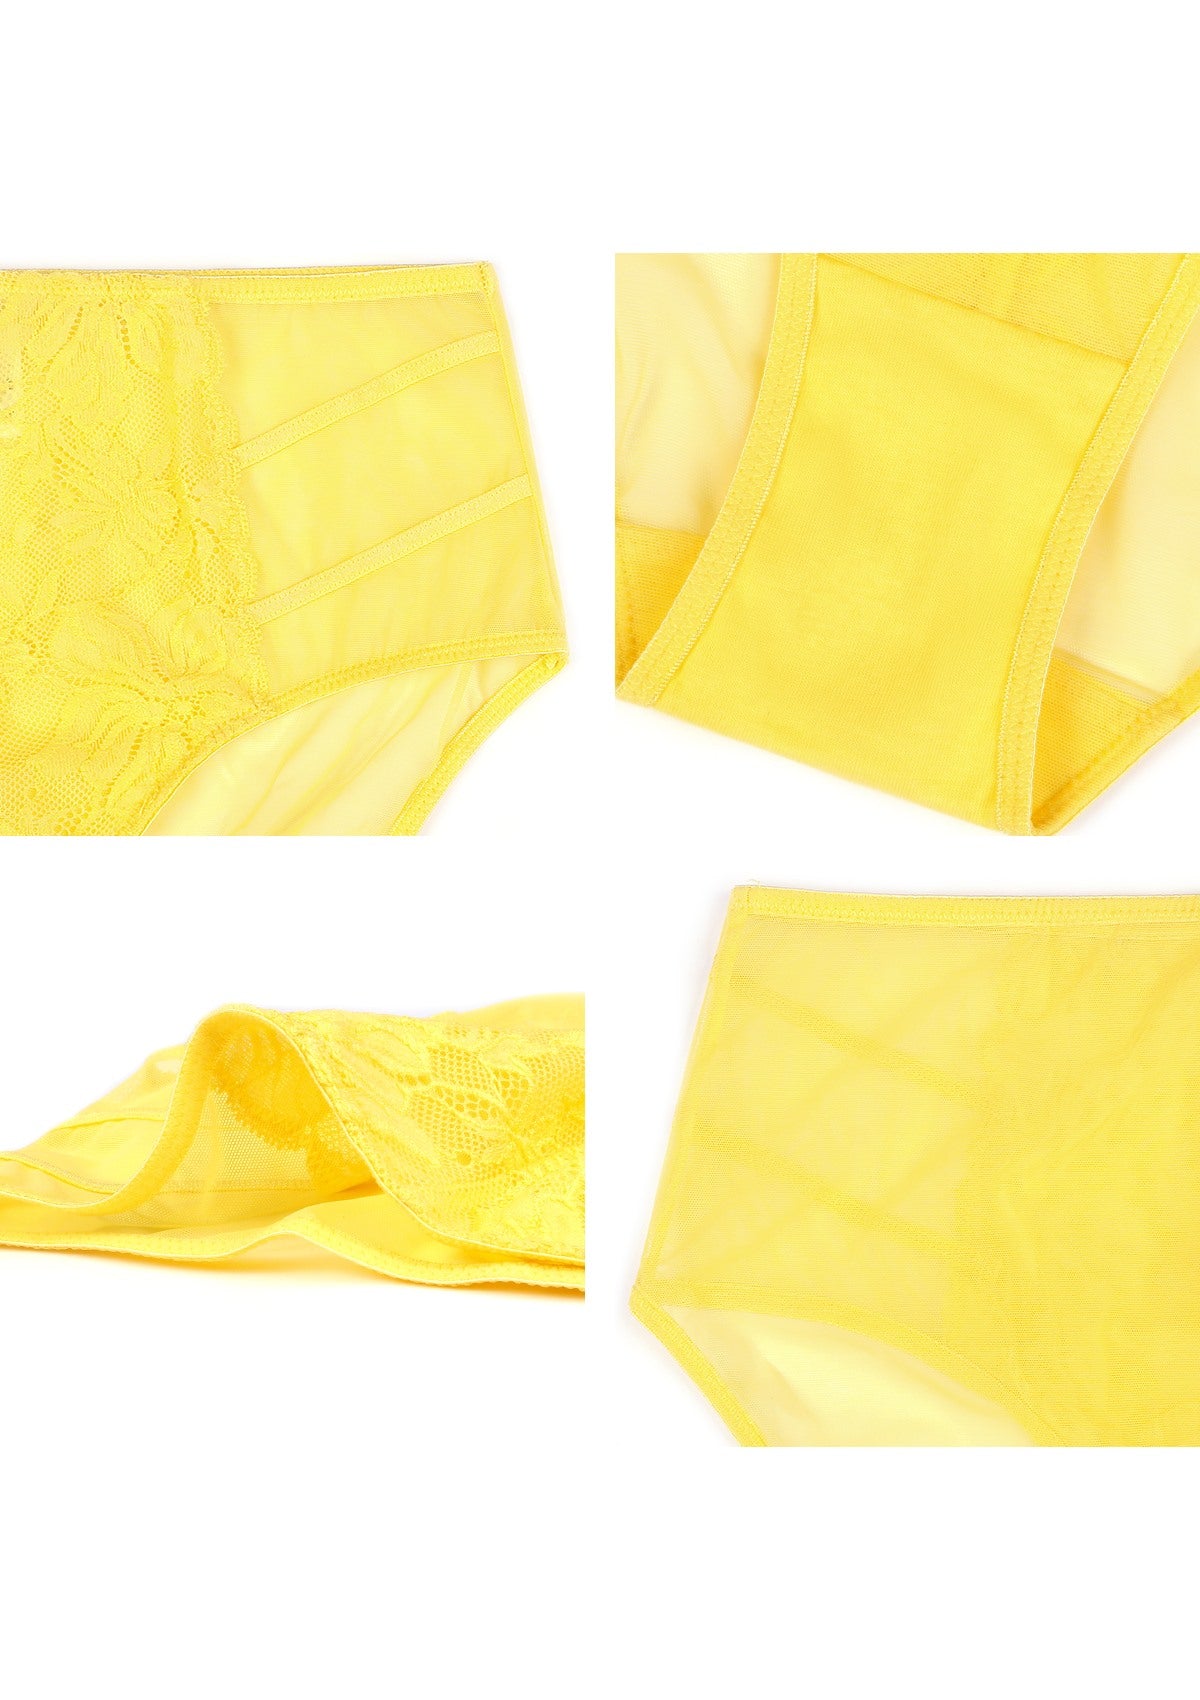 HSIA Spring Romance High-Rise Floral Lacy Panty-Comfort In Style - XXXL / Bright Yellow